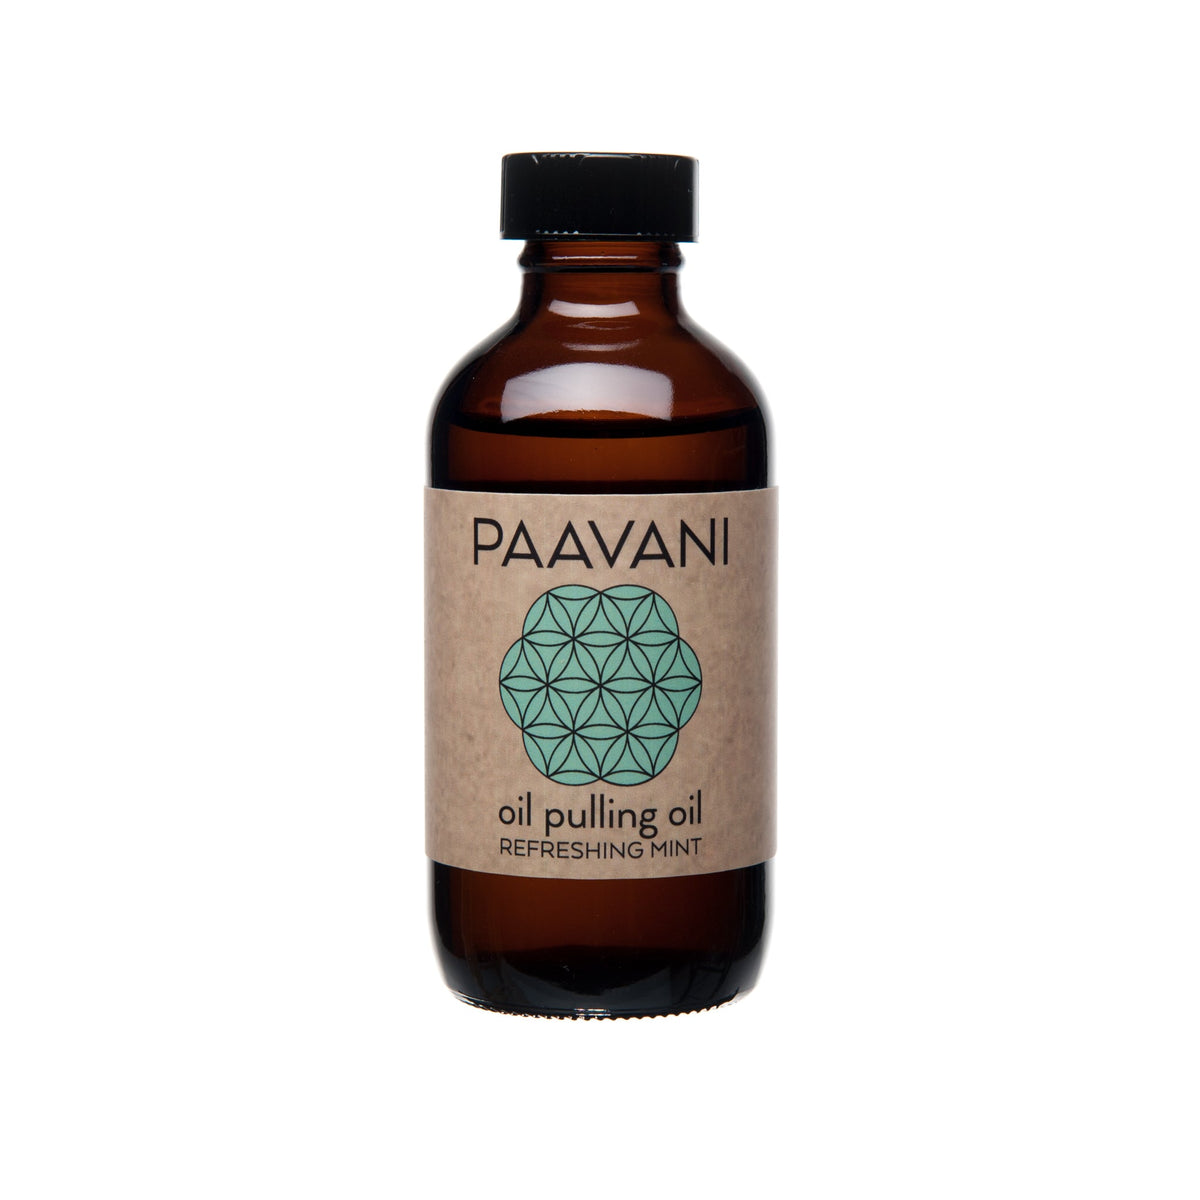 Paavani Ayurveda - Mint Pulling Oil with Organic Sesame Oil, Coconut O ...